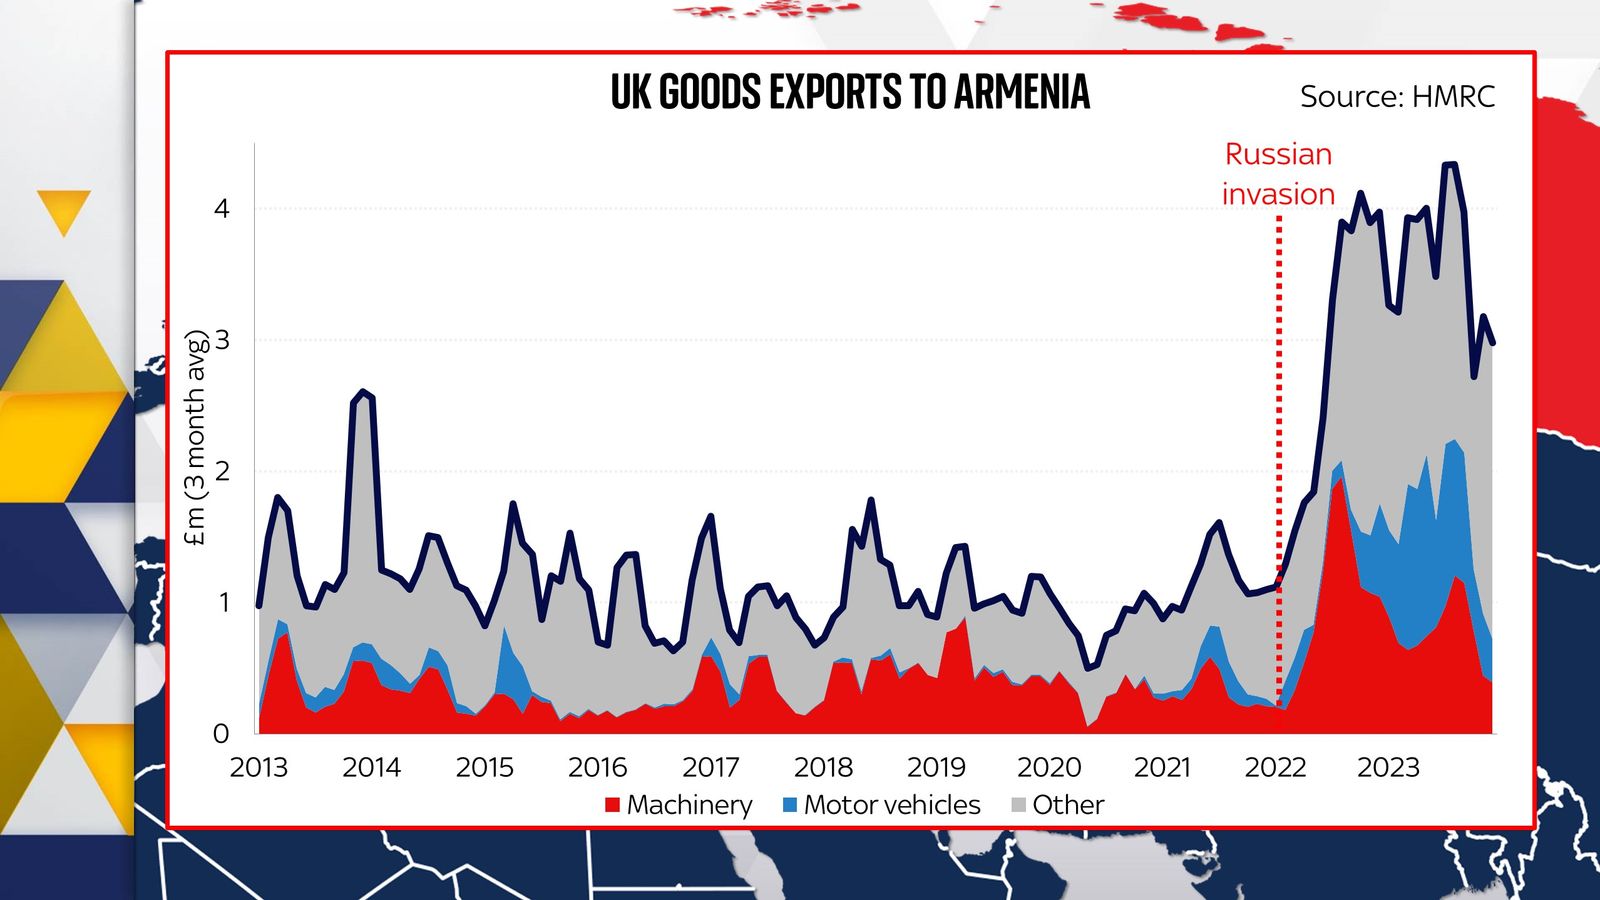 uk exports to these small ex-soviet states have surged - likely bolstering putin's war machine